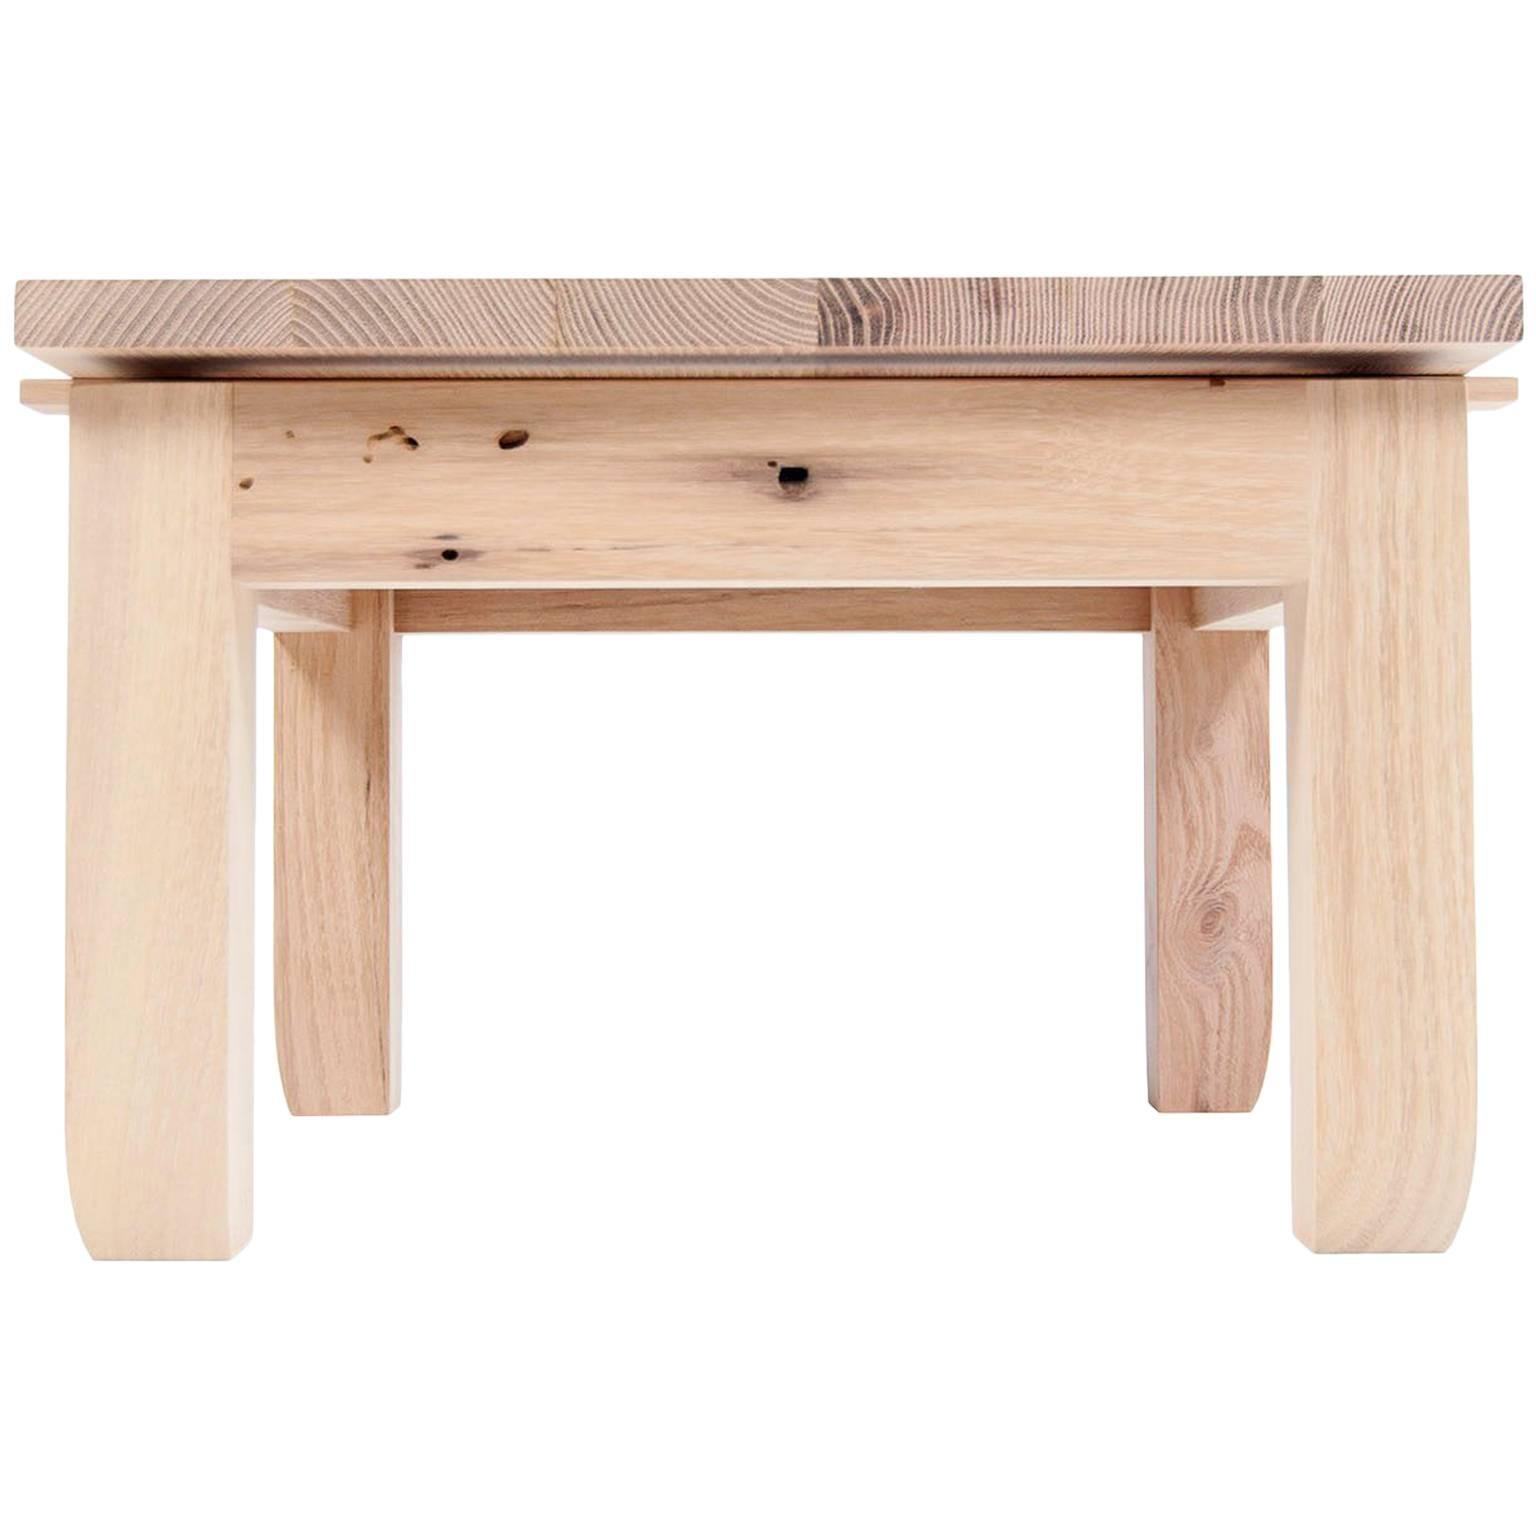 Contemporary Hardwood Black Locust Outdoor Low Prayer Stool Made in Brooklyn For Sale